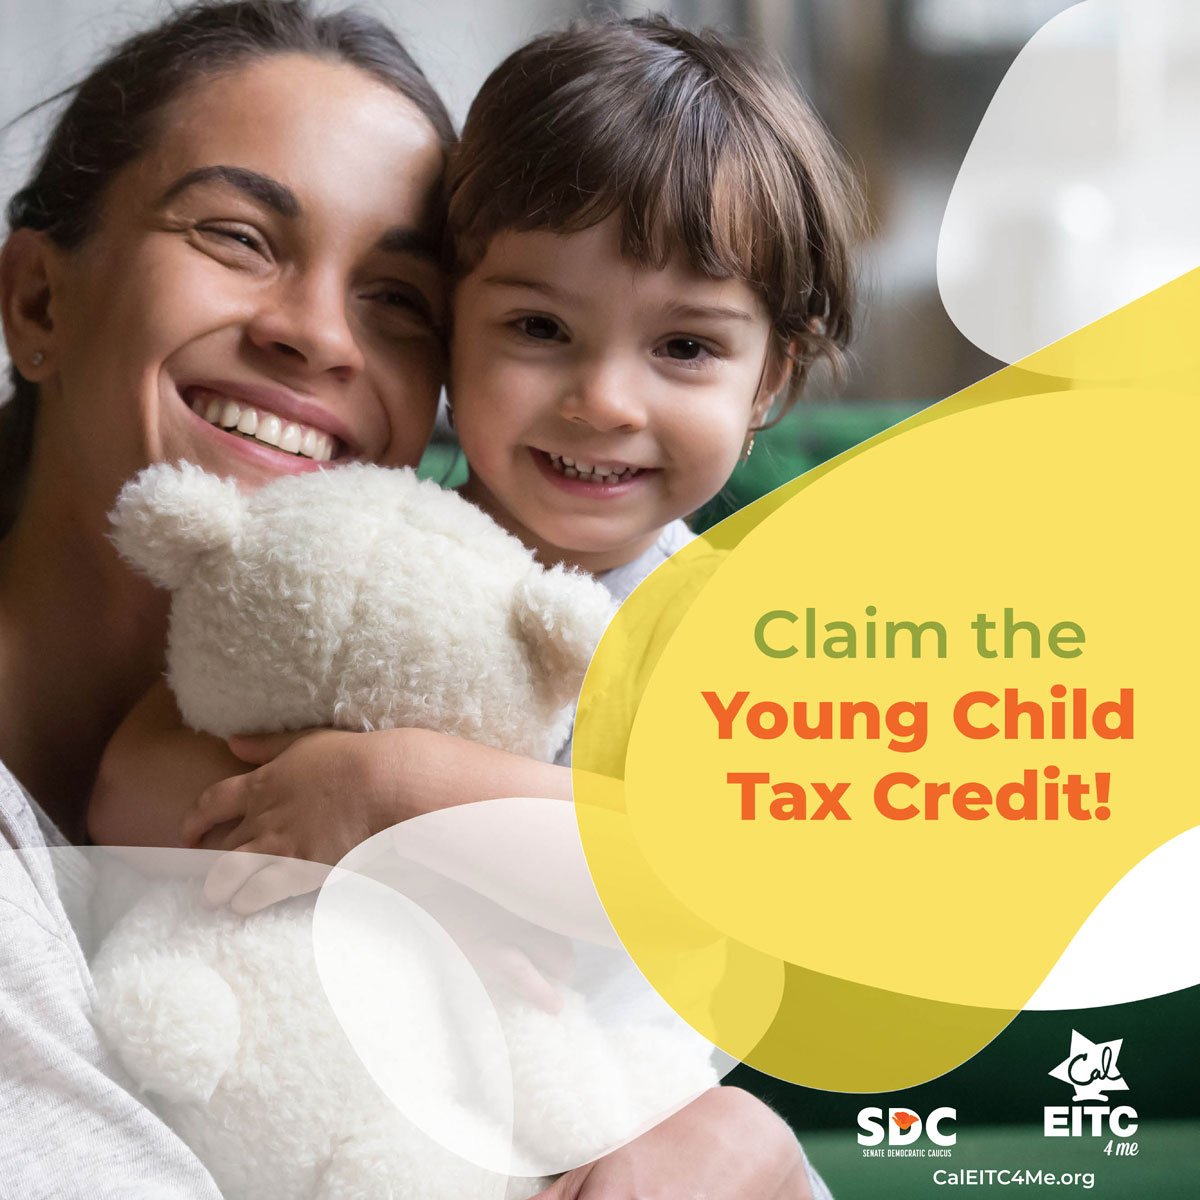 The Young Child Tax Credit can help parents get needed money for groceries, diapers, childcare & more. Parents with children under the age of 6 might qualify. Calculate your eligibility: caleitc4me.org/eitc-calculato… #CALeg #Taxes #CalEITC @CalEITC4Me @CalFTB